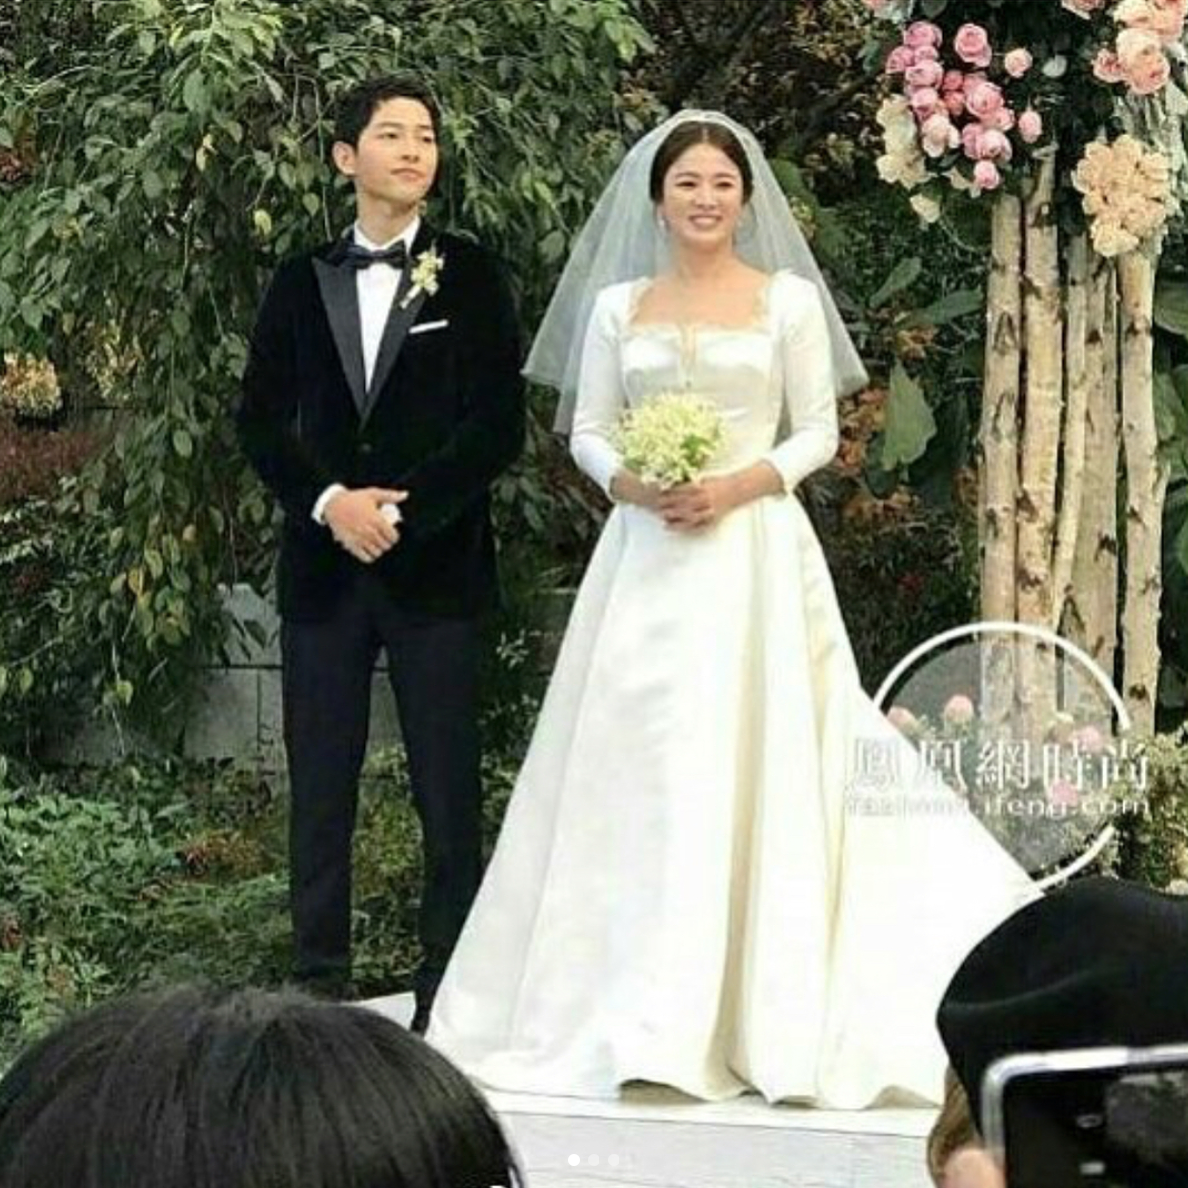 Song Joong-ki and Song Hye-kyo tie the knot at a private wedding ceremony on Tuesday (31 October). (PHOTO: Instagram)